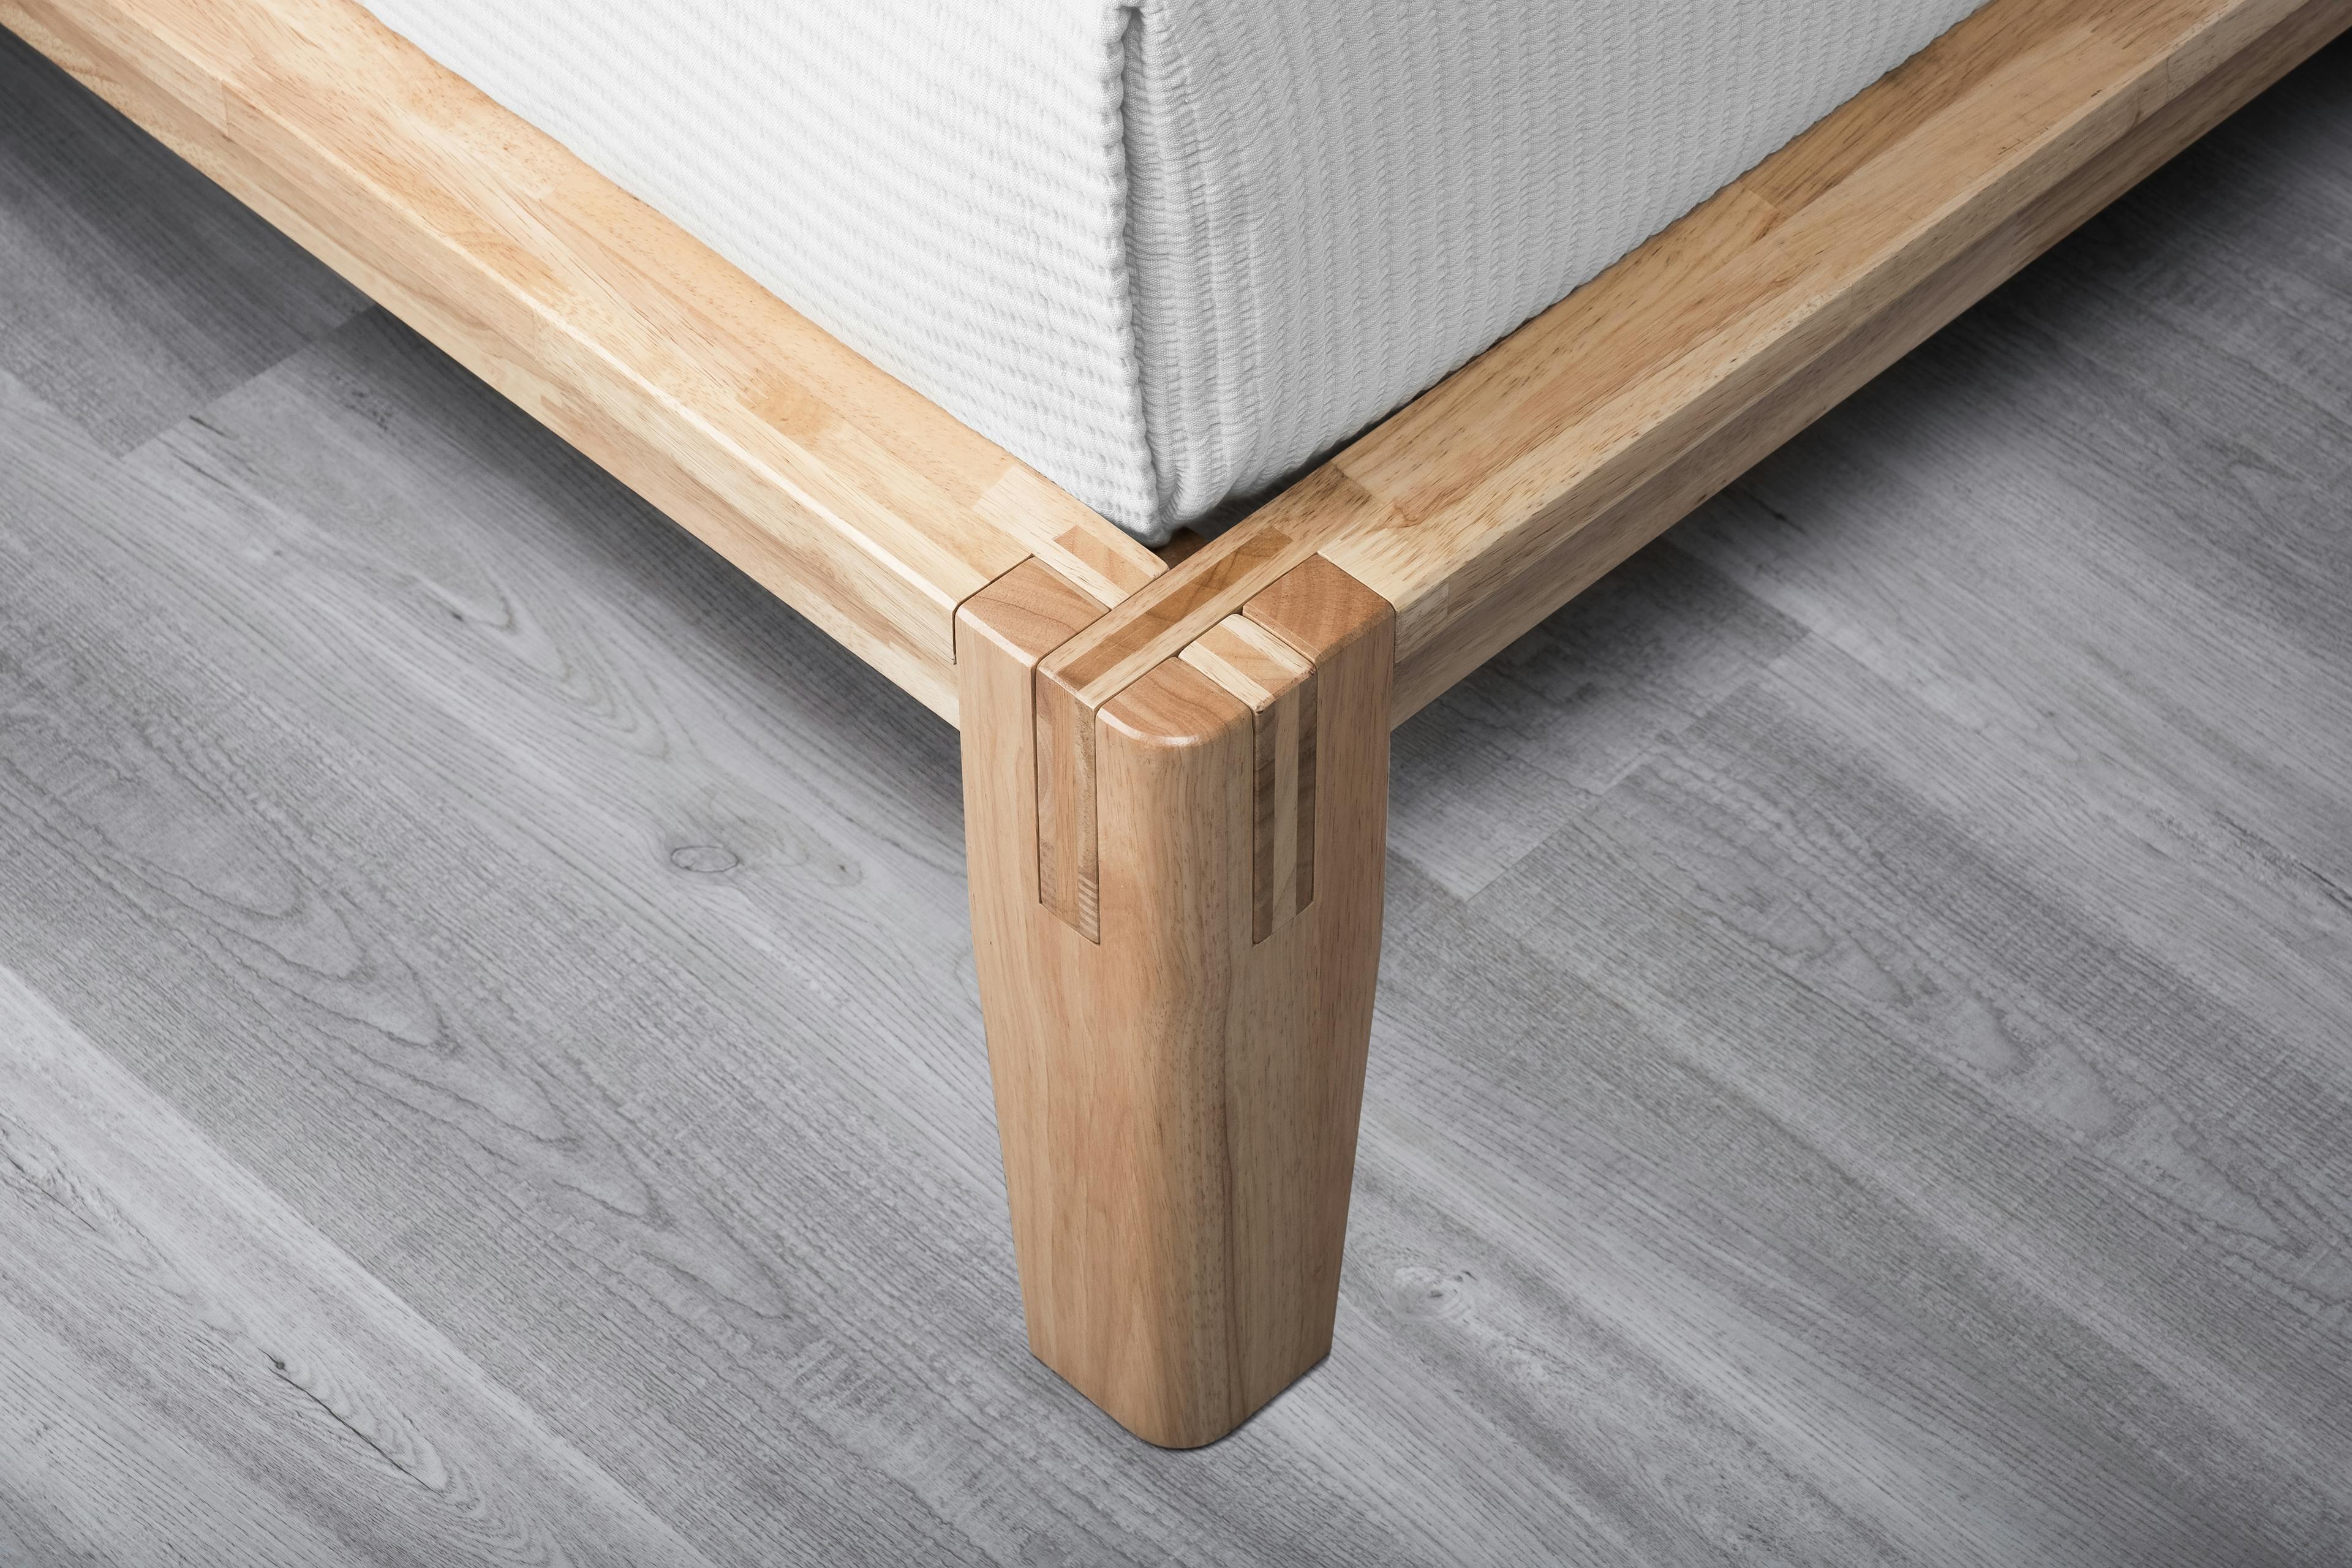 The Bed (Natural) - Joint Detail - 3:2